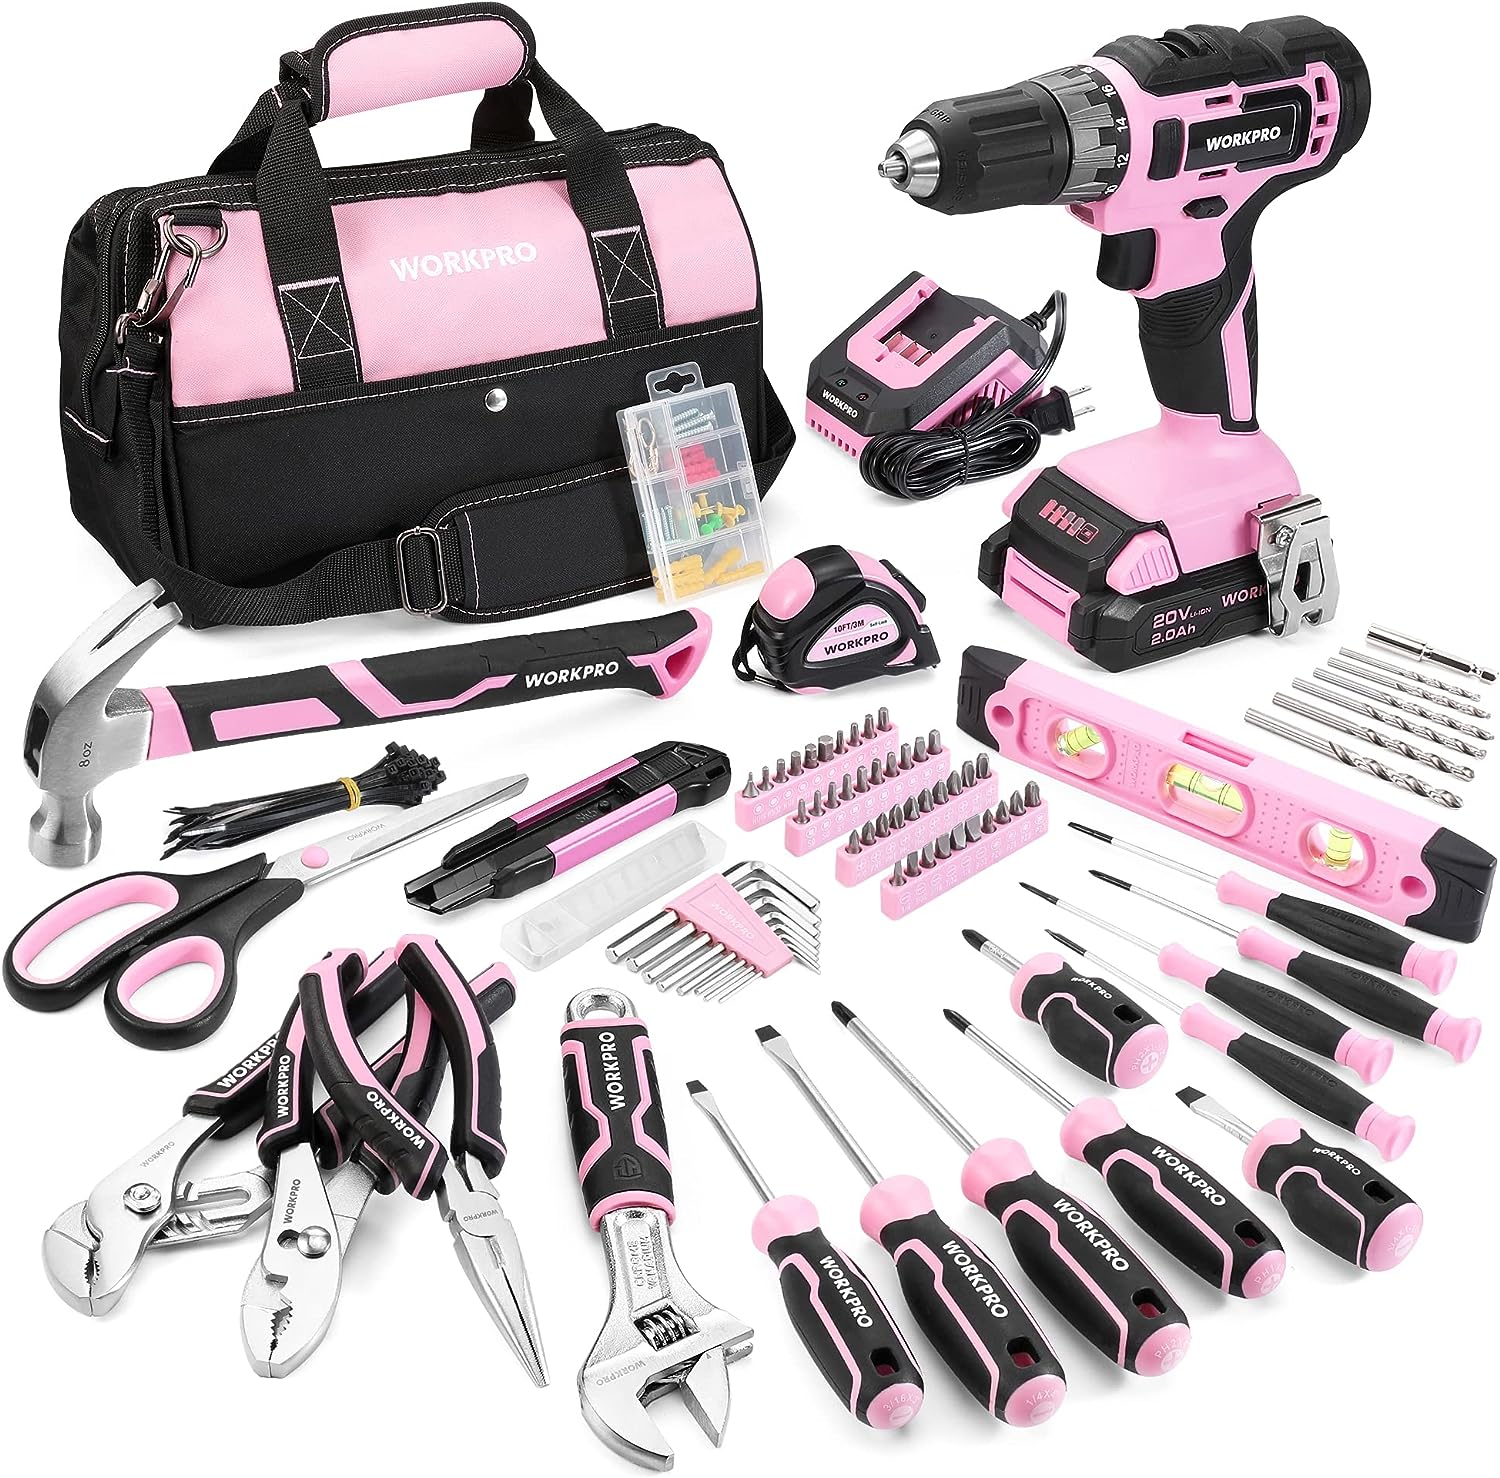 WORKPRO Pink Home Tool Kit Review